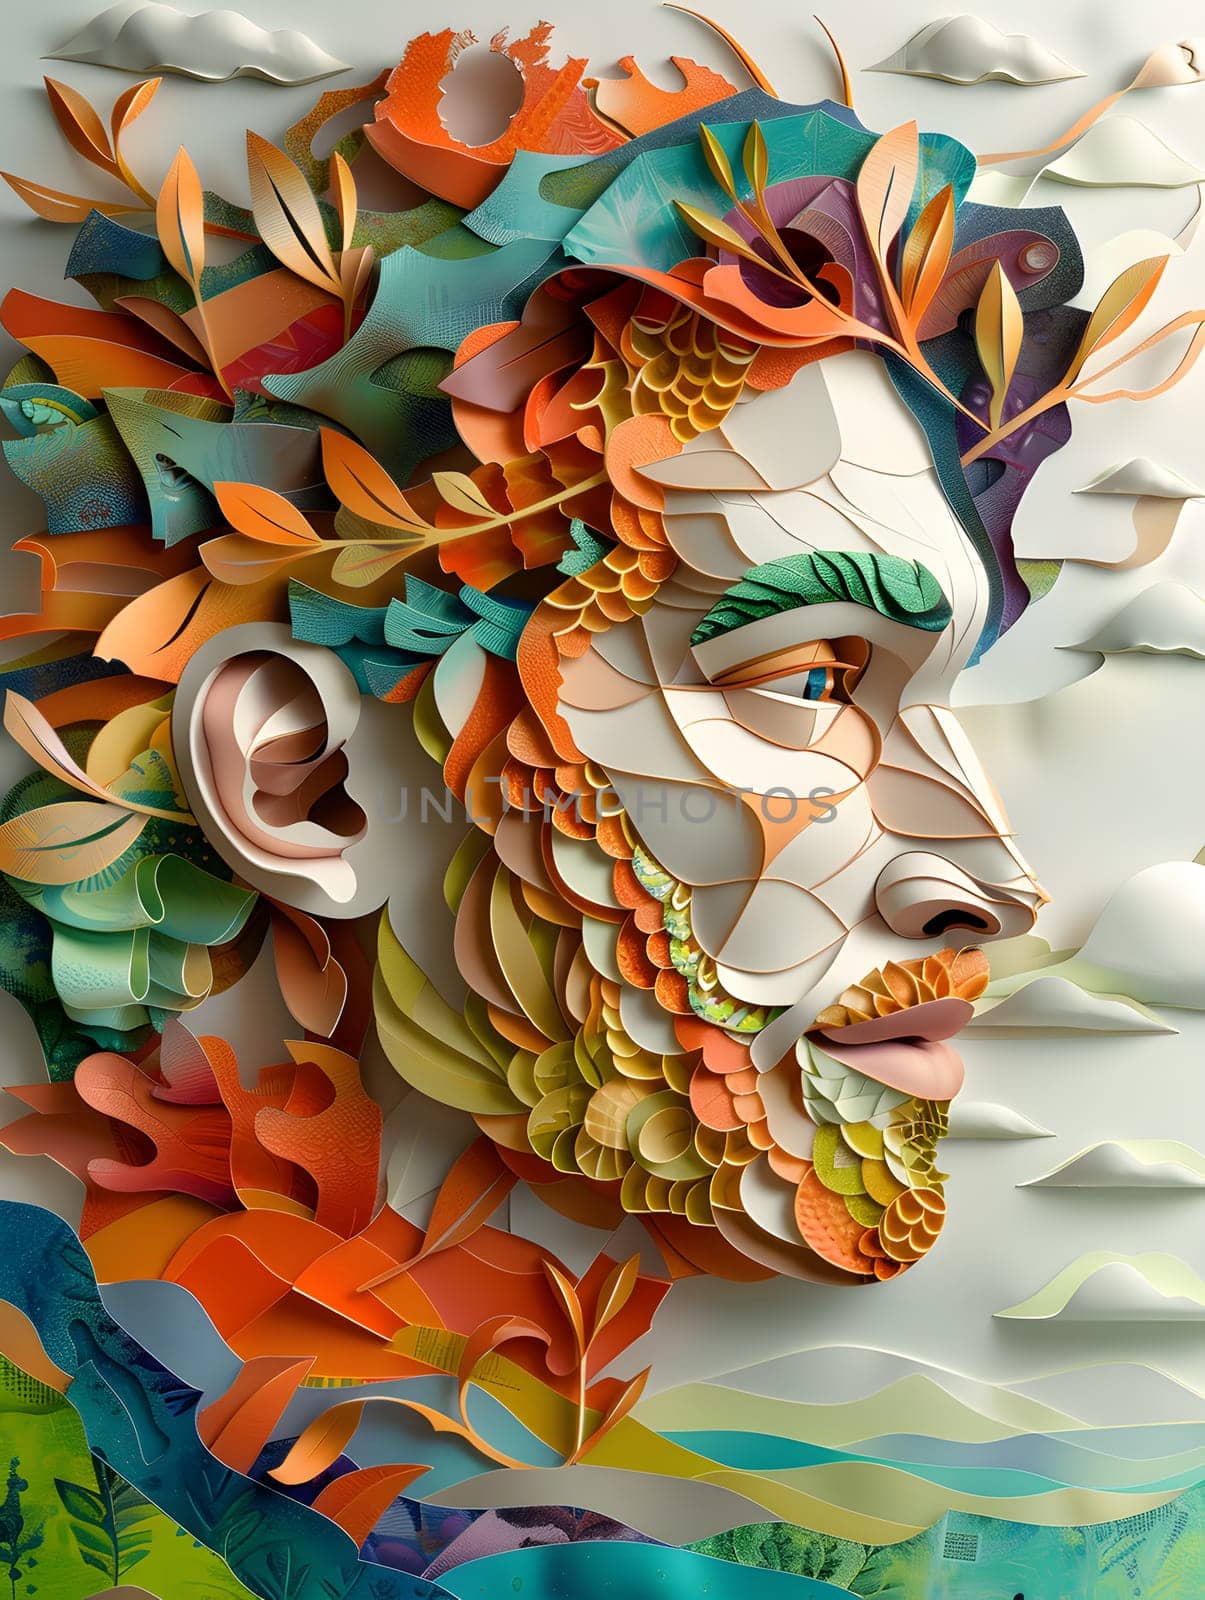 a colorful painting of a man s face made of paper by Nadtochiy